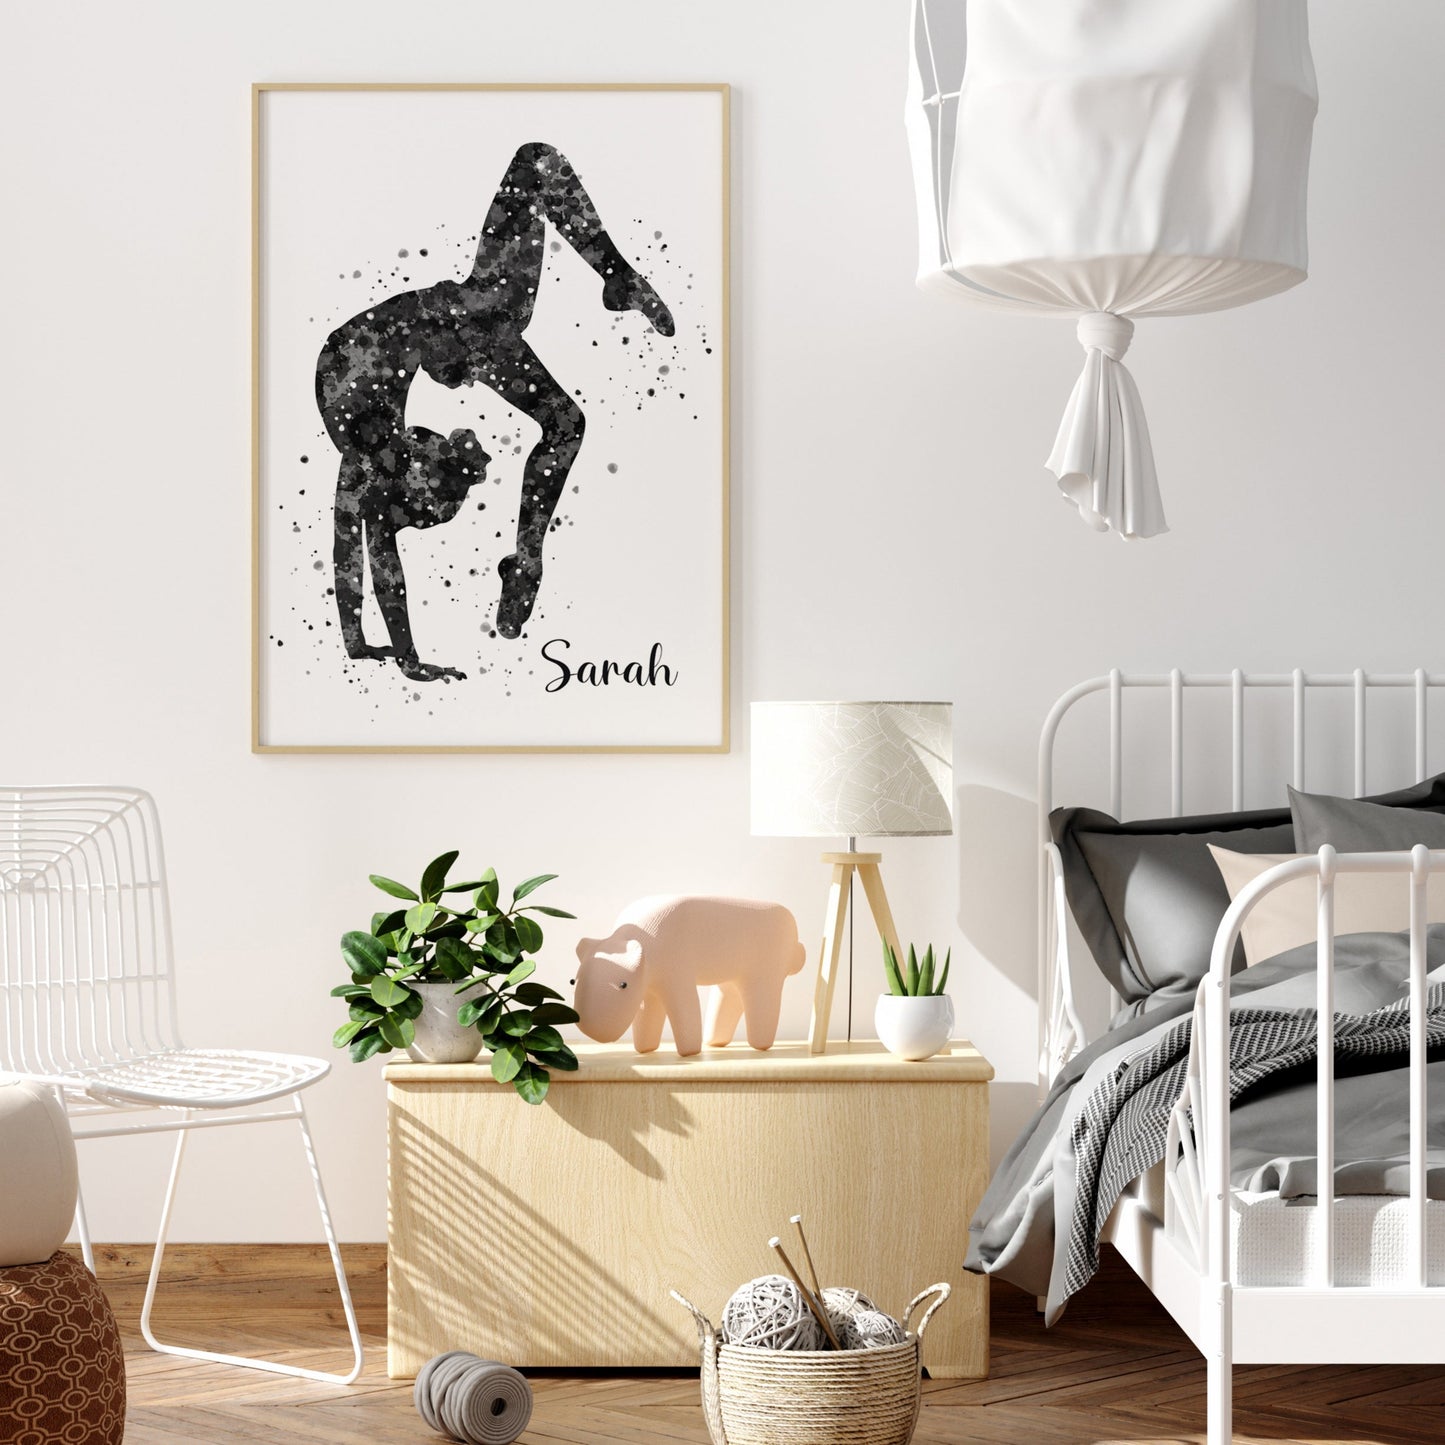 Personalized gymnastics poster showing girl bending backwards with a custom name under her. Designed in black and white watercolor splatters. Perfect gymnastics gifts for girls, gymnastics prints, dance wall art décor in a girls bedroom and birthday gifts for girls.